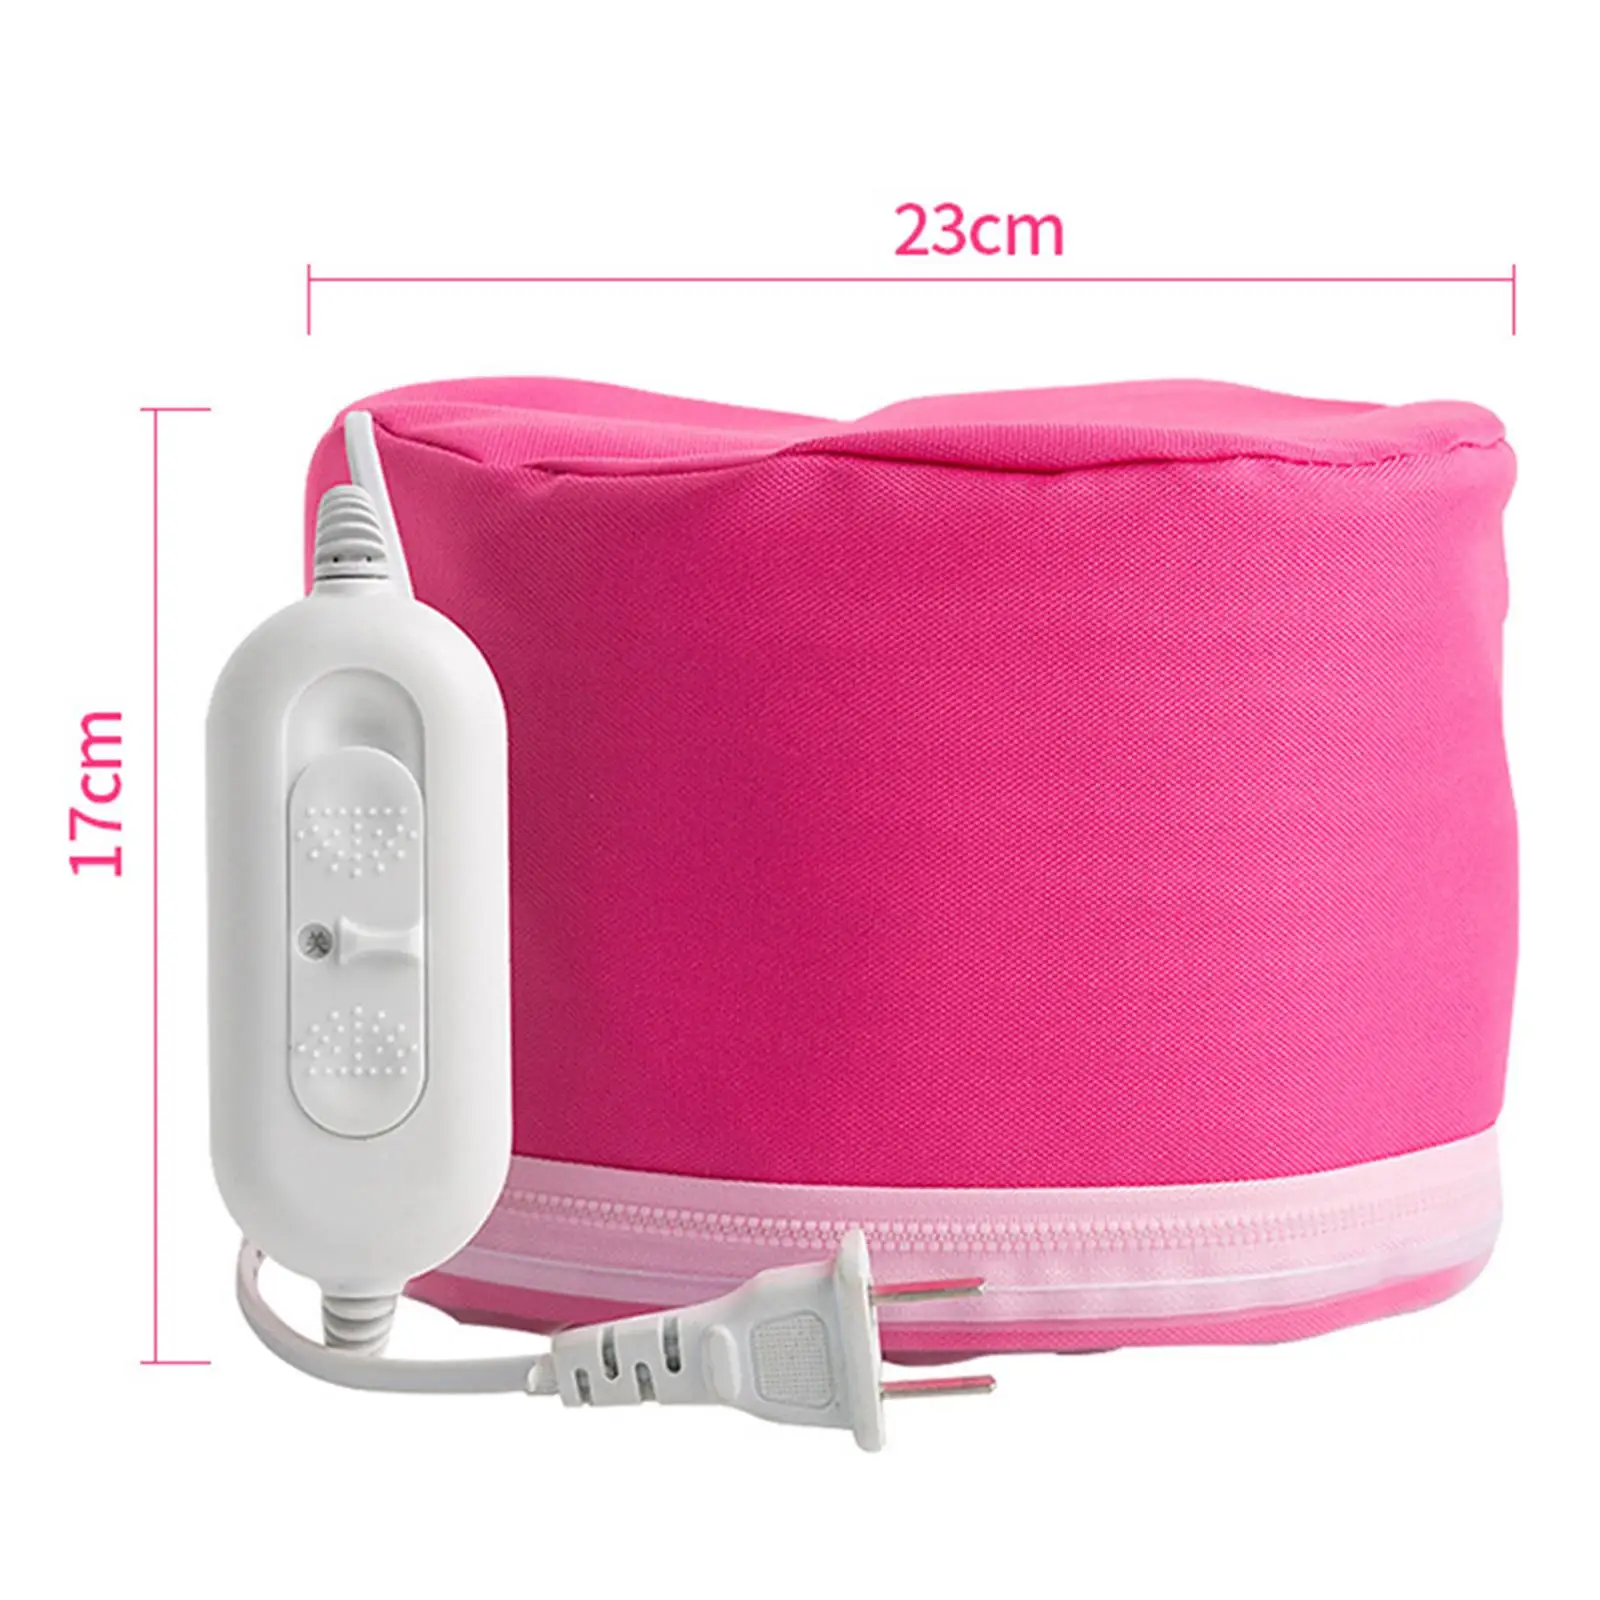 Hair Heating Caps Steamer 3-Mode Adjustable with Zipper Safe Microwave Hot Caps for Deep Conditioning Salon Curling Styling SPA